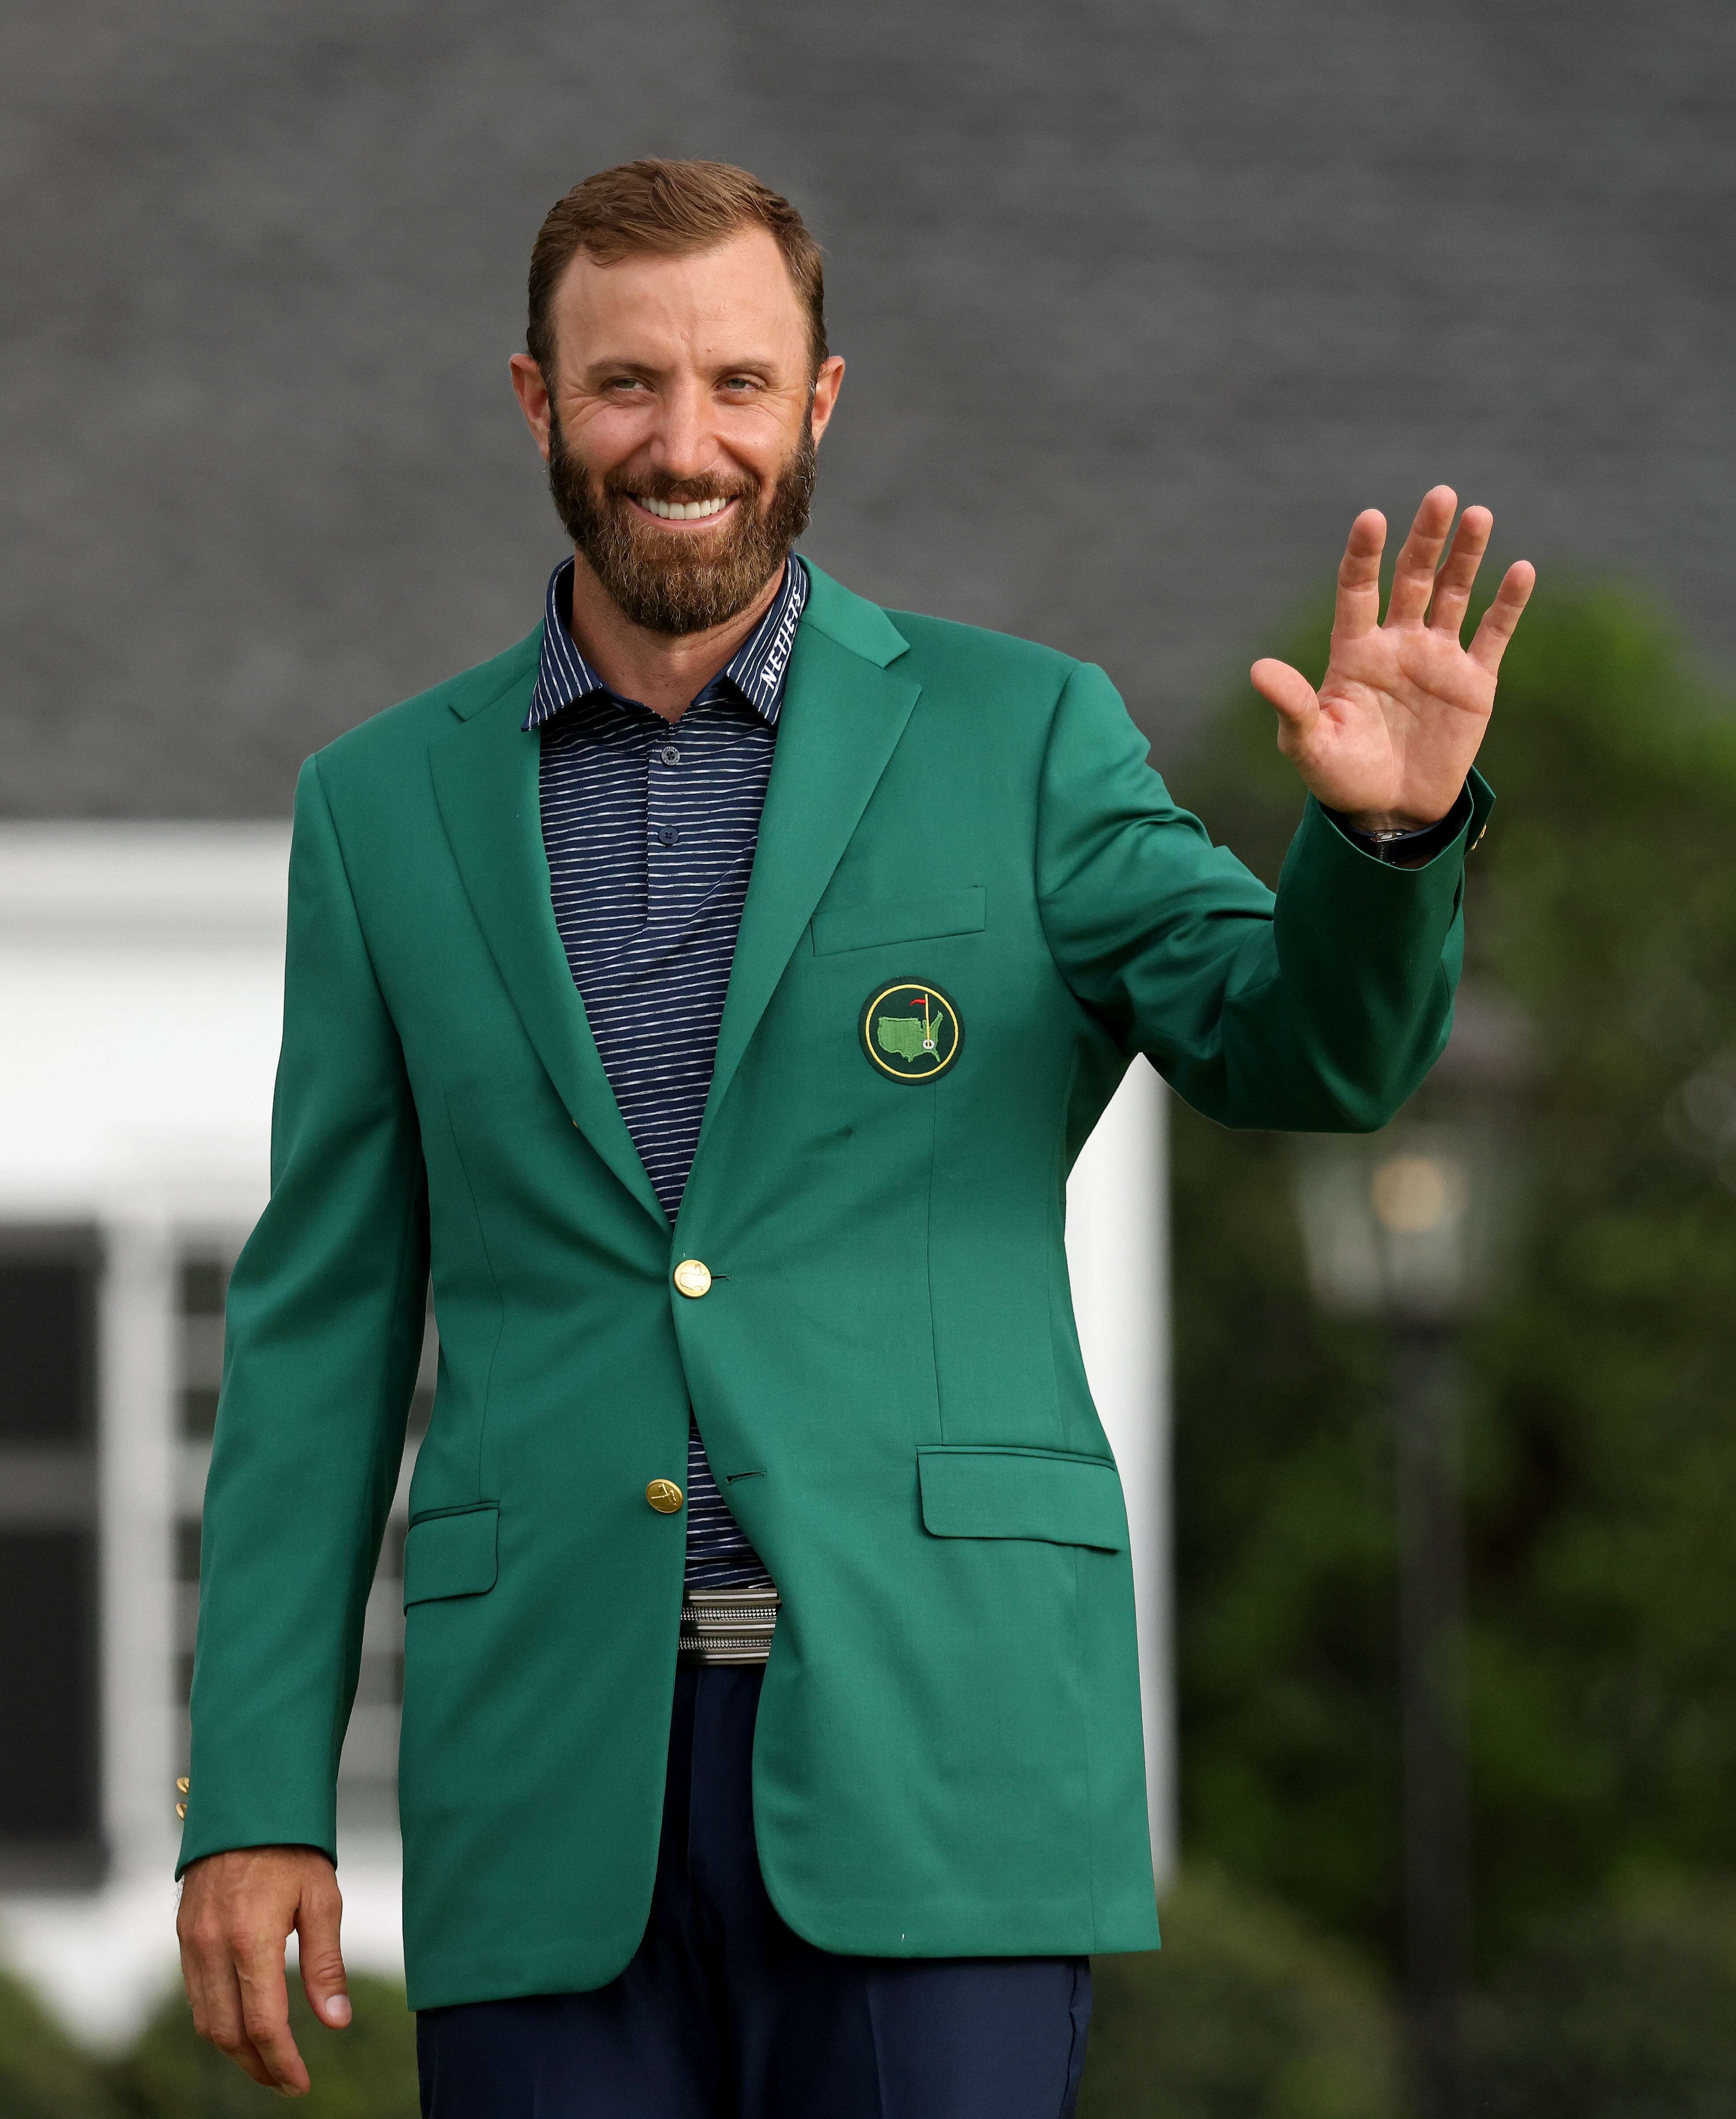 Dustin Johnson of the United States waves during the Green Jacket Ceremony after winning the Masters at Augusta National Golf Club in Georgia, US on Sunday. Photo: Getty Images / AFP